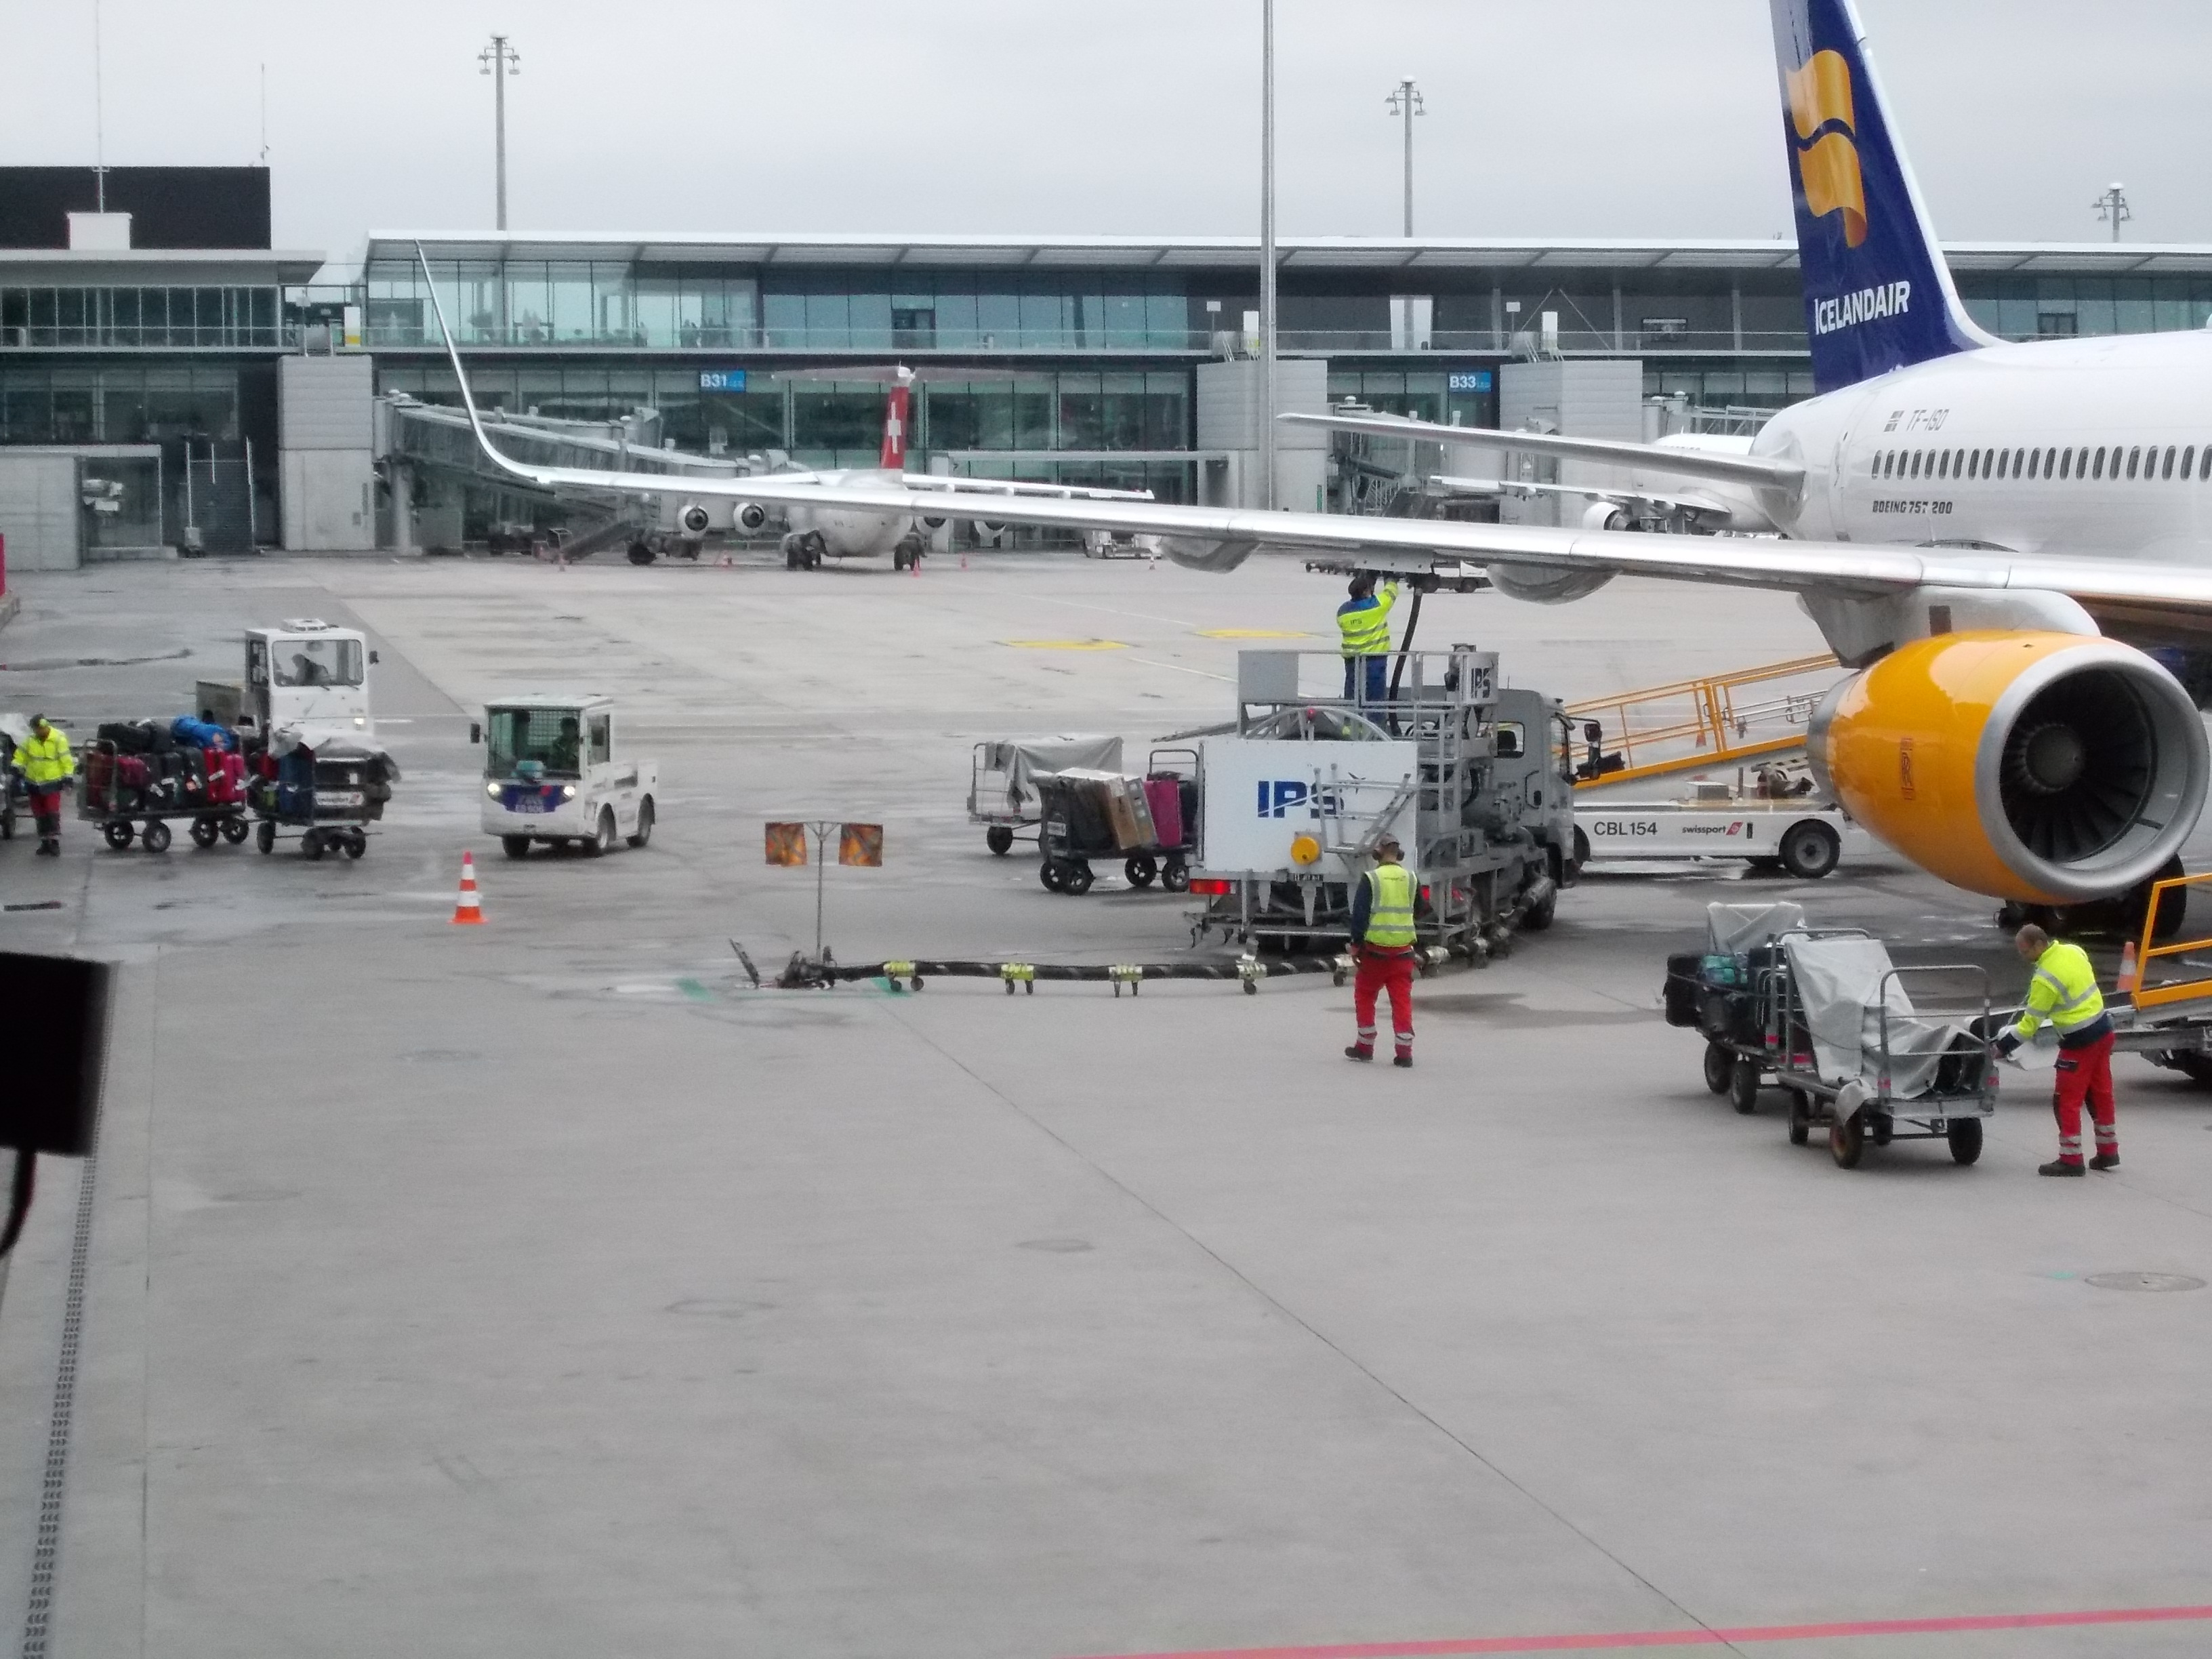 Icelandair aircraft with bike boxes being unloaded down cargo ramp.